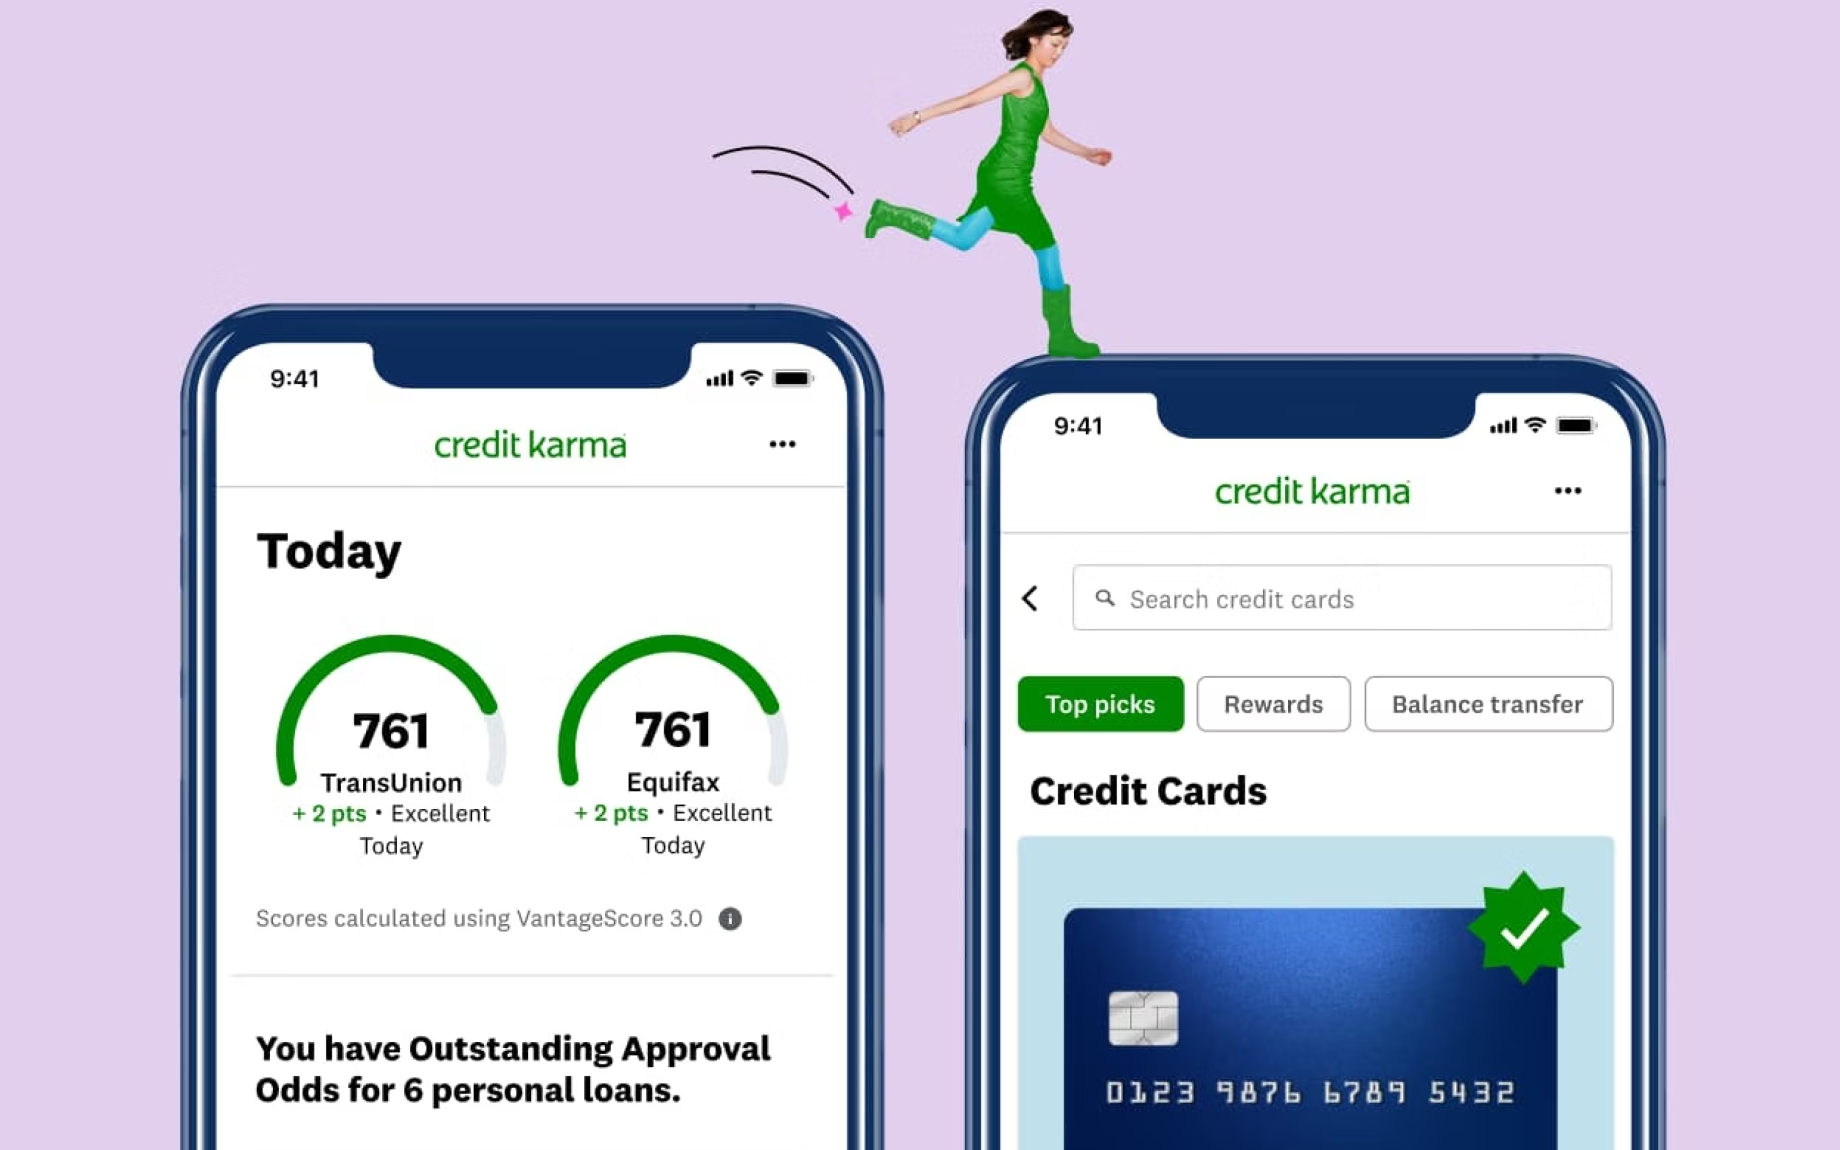  Credit Karma interface updated from application development services.